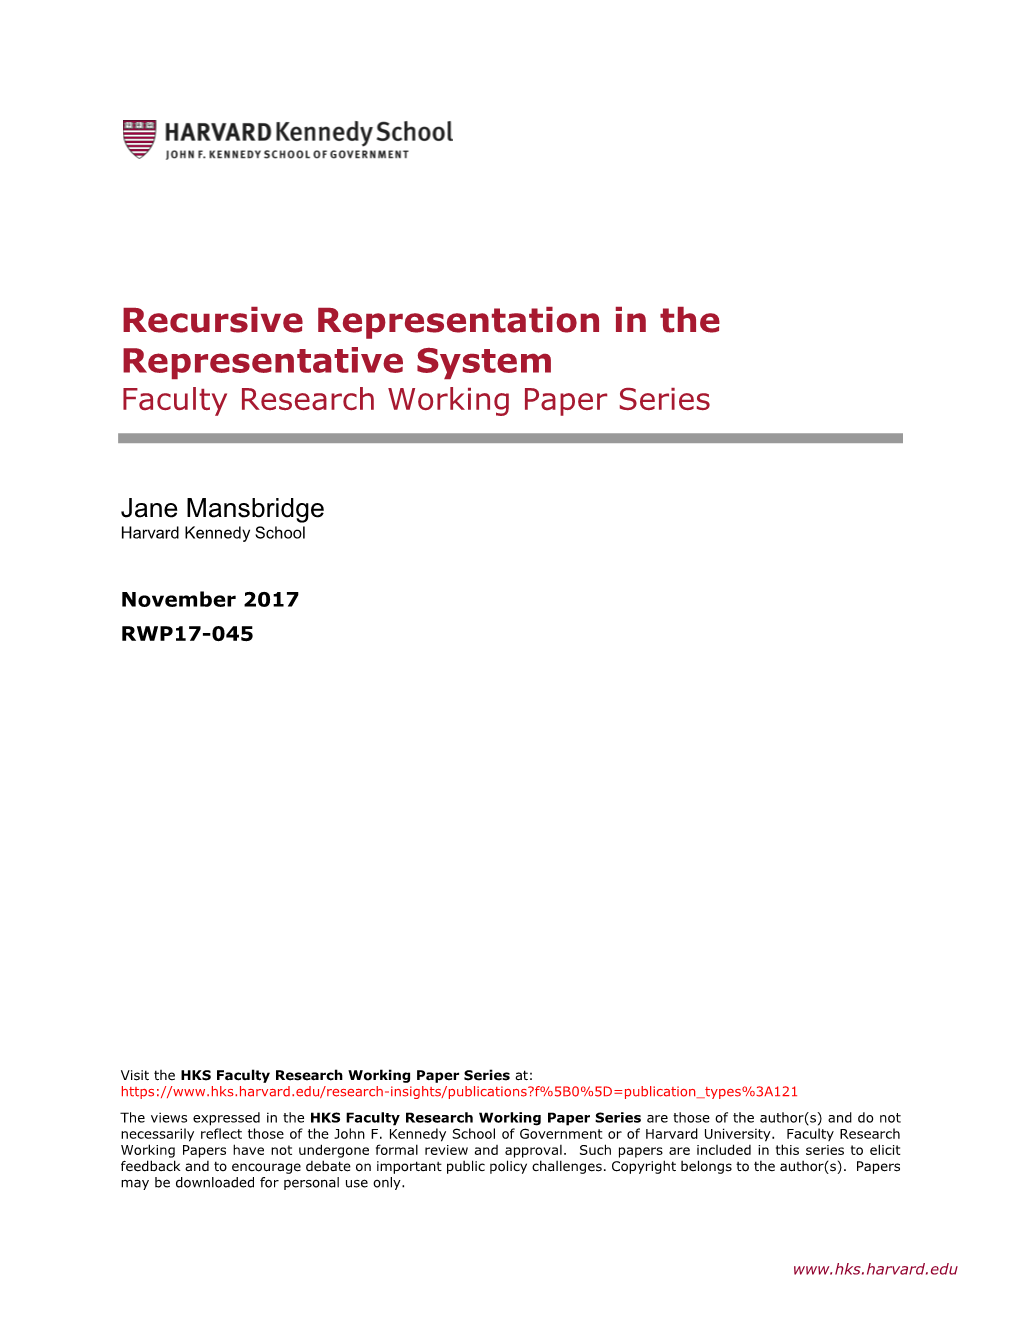 Recursive Representation in the Representative System Faculty Research Working Paper Series